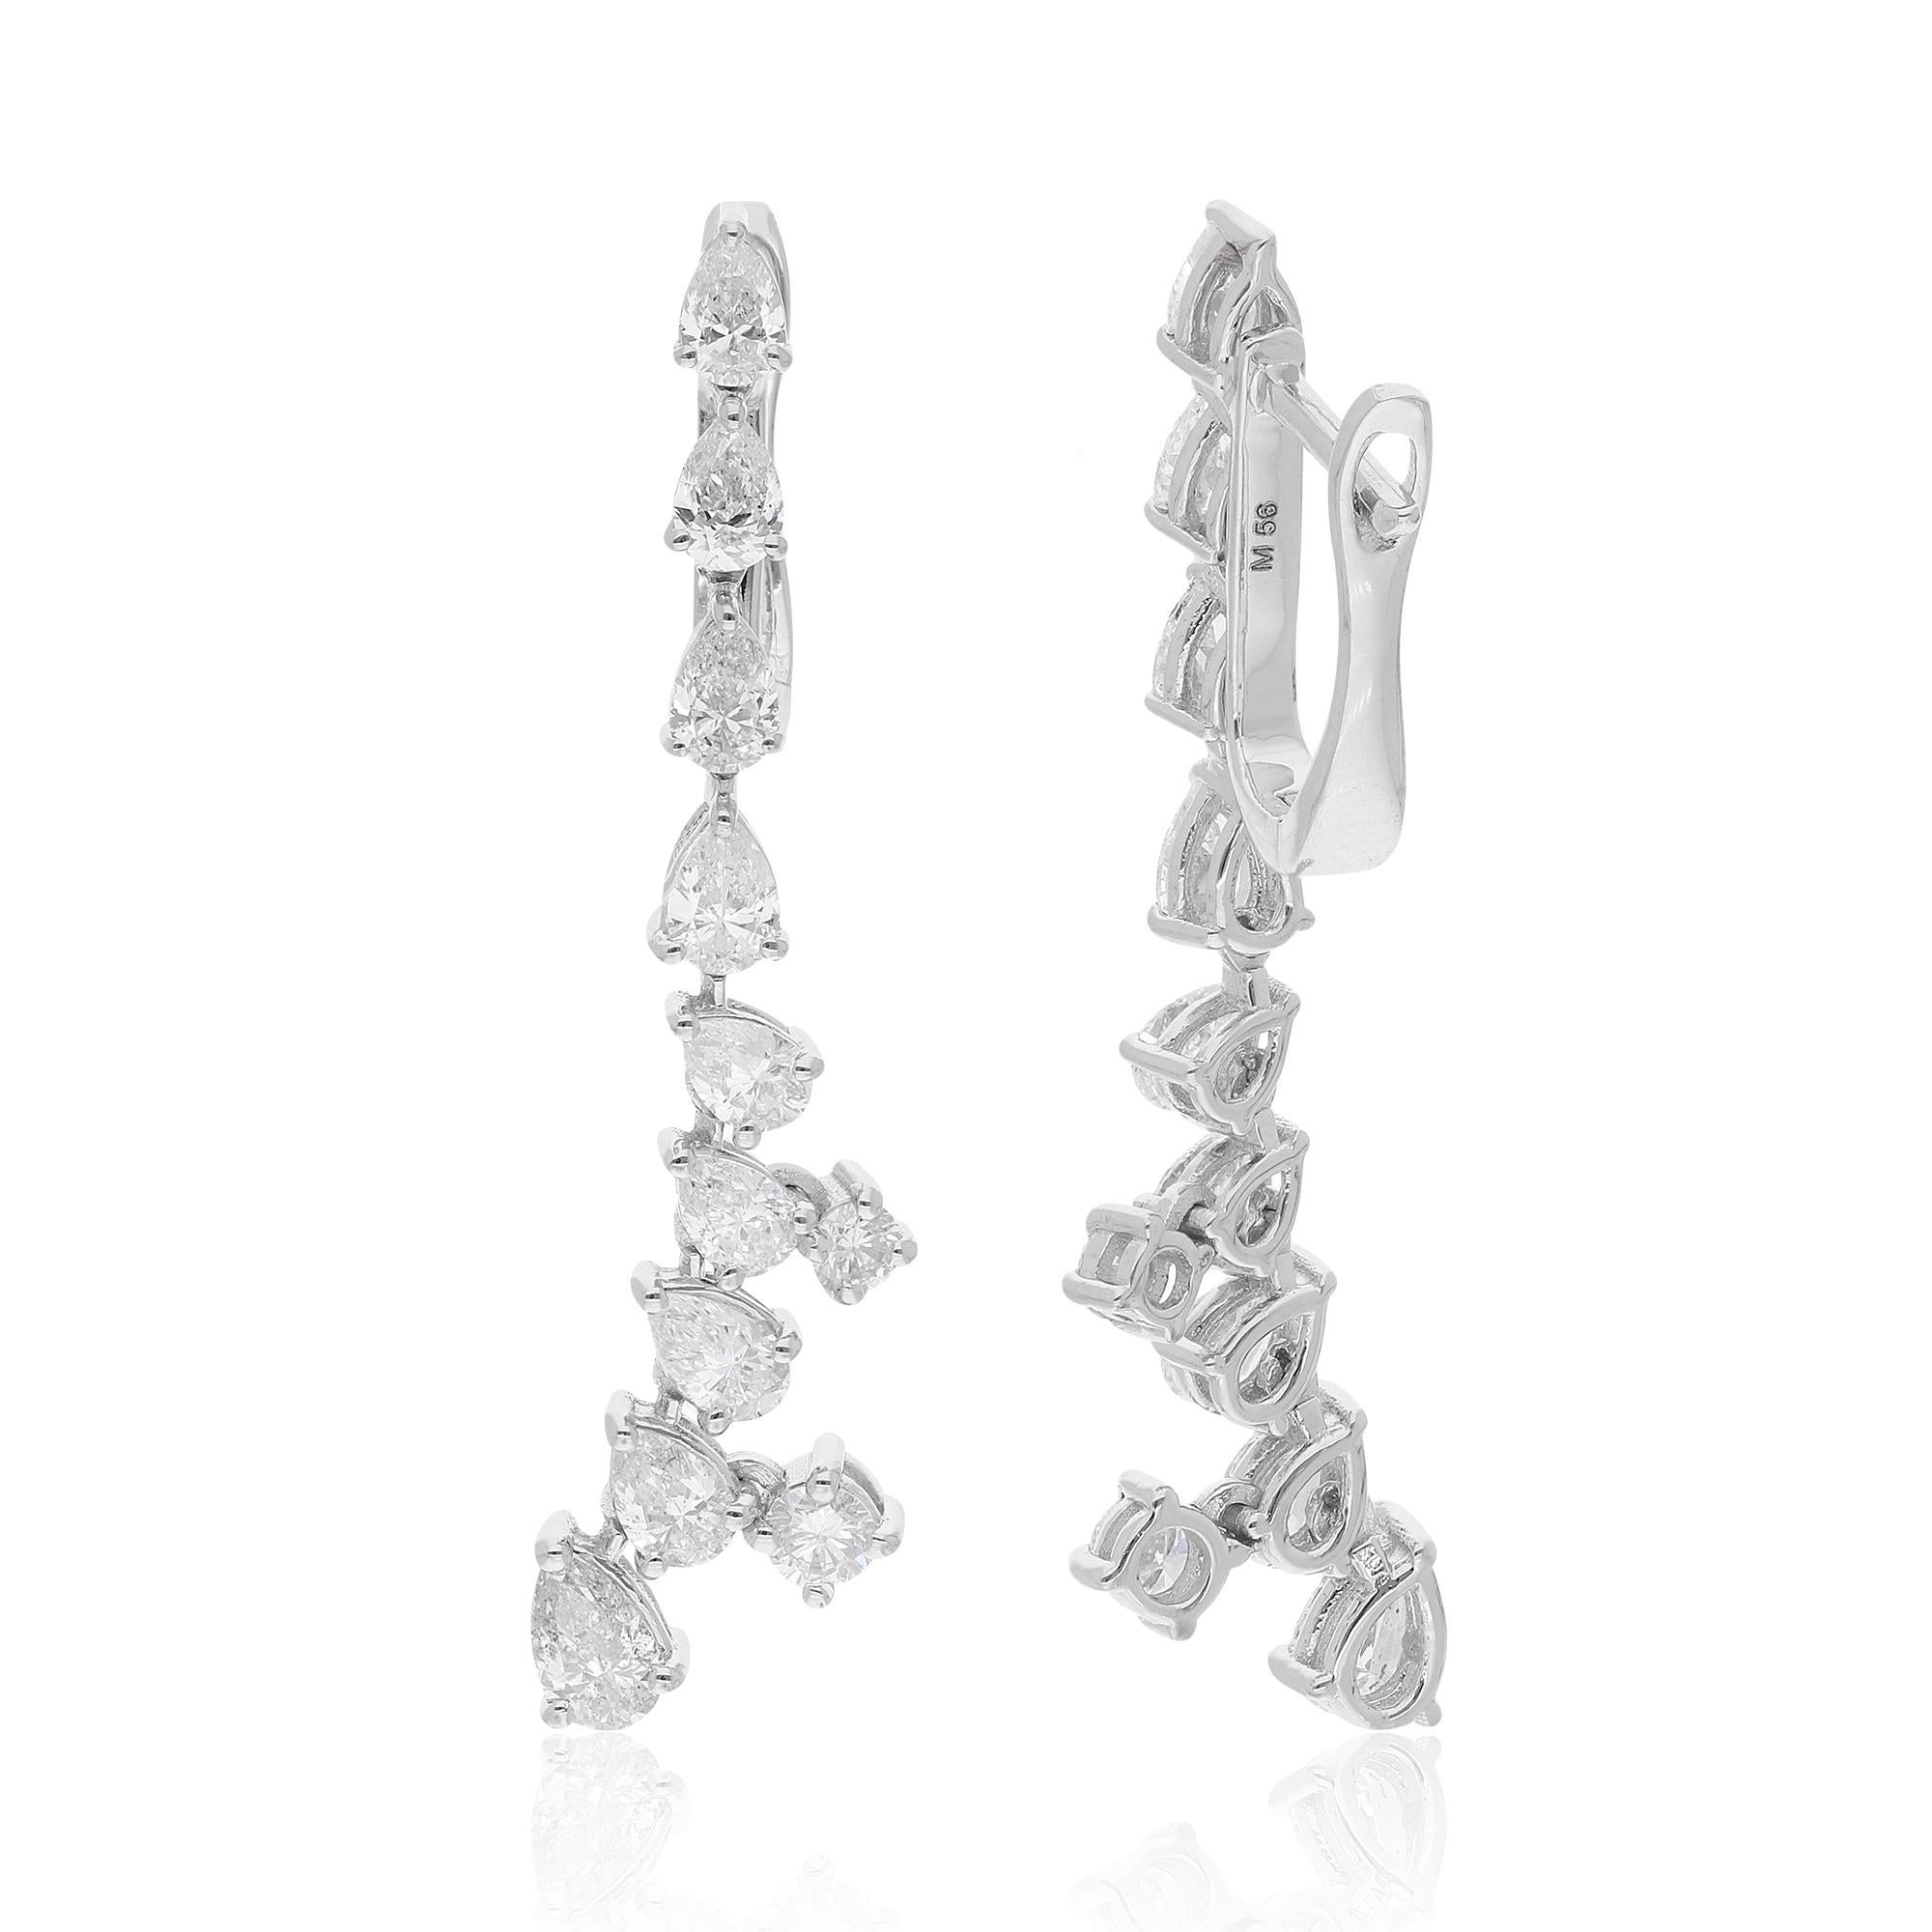 Elevate your style with the timeless elegance of these exquisite 2.84 Ct. Pear & Round Diamond Dangle Earrings, meticulously crafted in luxurious 14 Karat White Gold. This stunning pair of fine jewelry is a radiant celebration of sophistication and